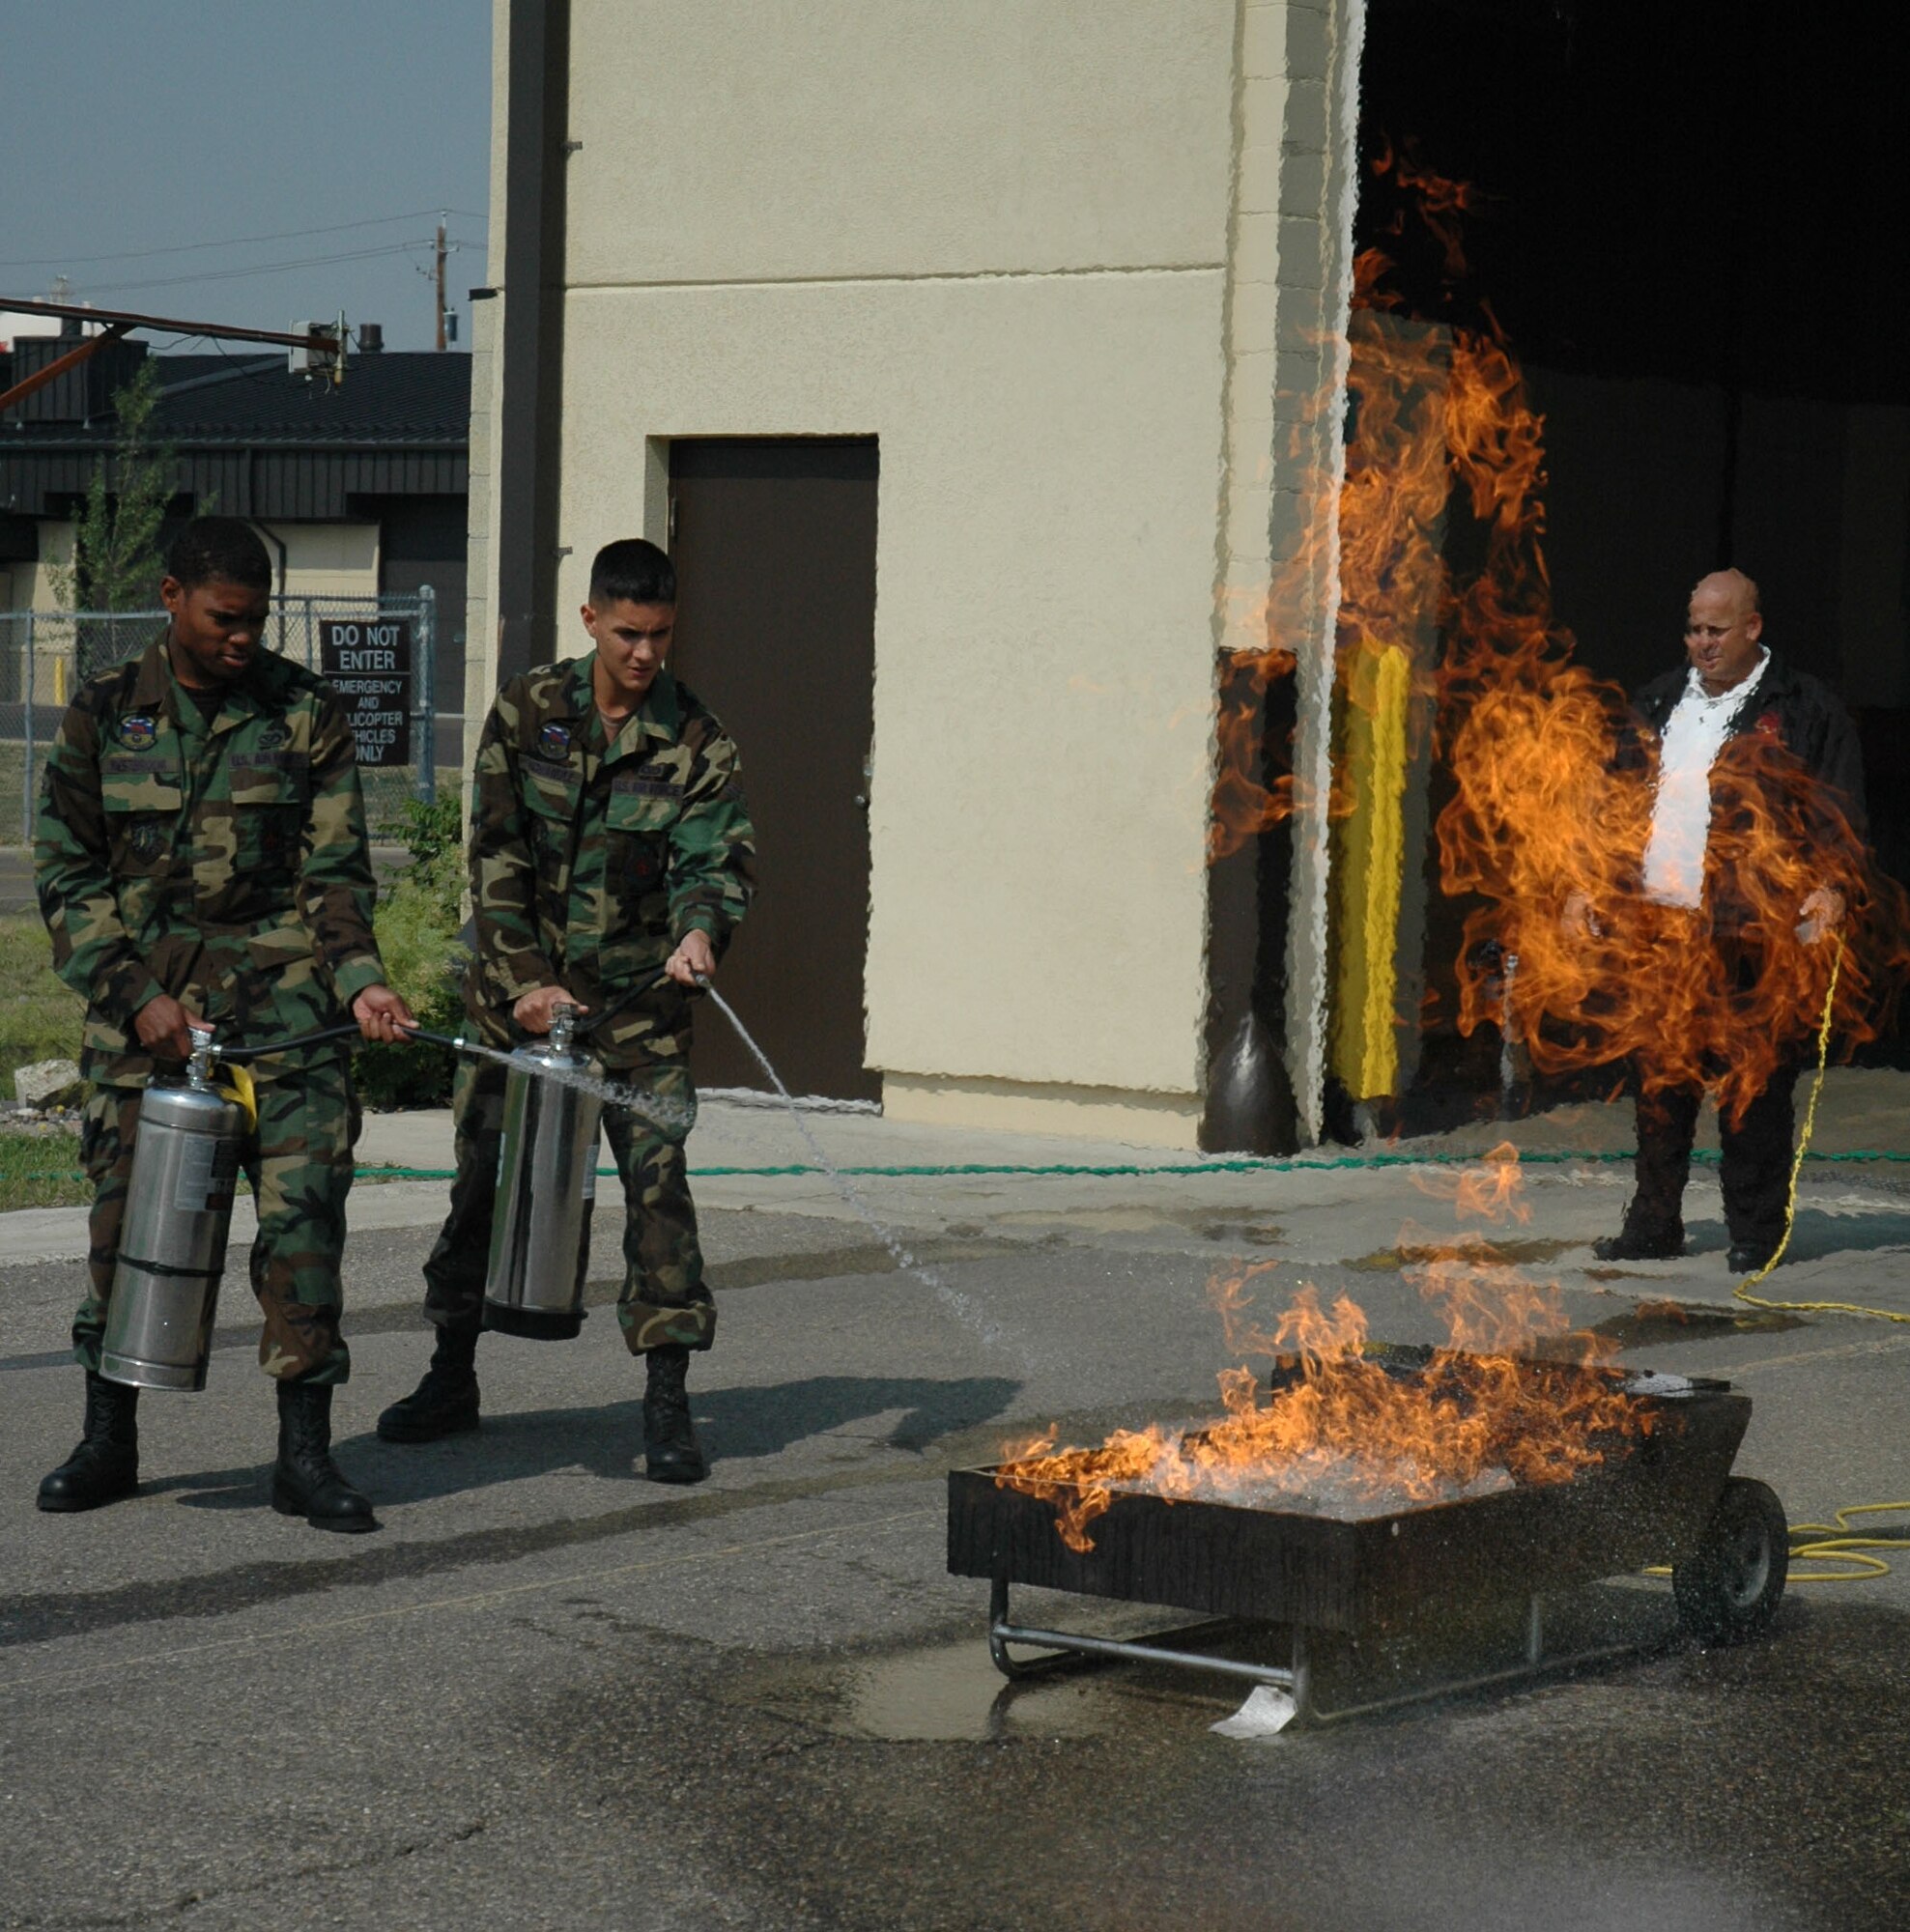 Airman Gerald Westbrook  and Airman 1st Class Juan Hernandez, 341st Civil Engineer Squadron fire fighters, demonstrate fire extinguishing procedures as Rickey Naccarato, 341st CES fire inspector, ignites the flames. (U.S. Air Force photo / Airman 1st Class Emerald Ralston)